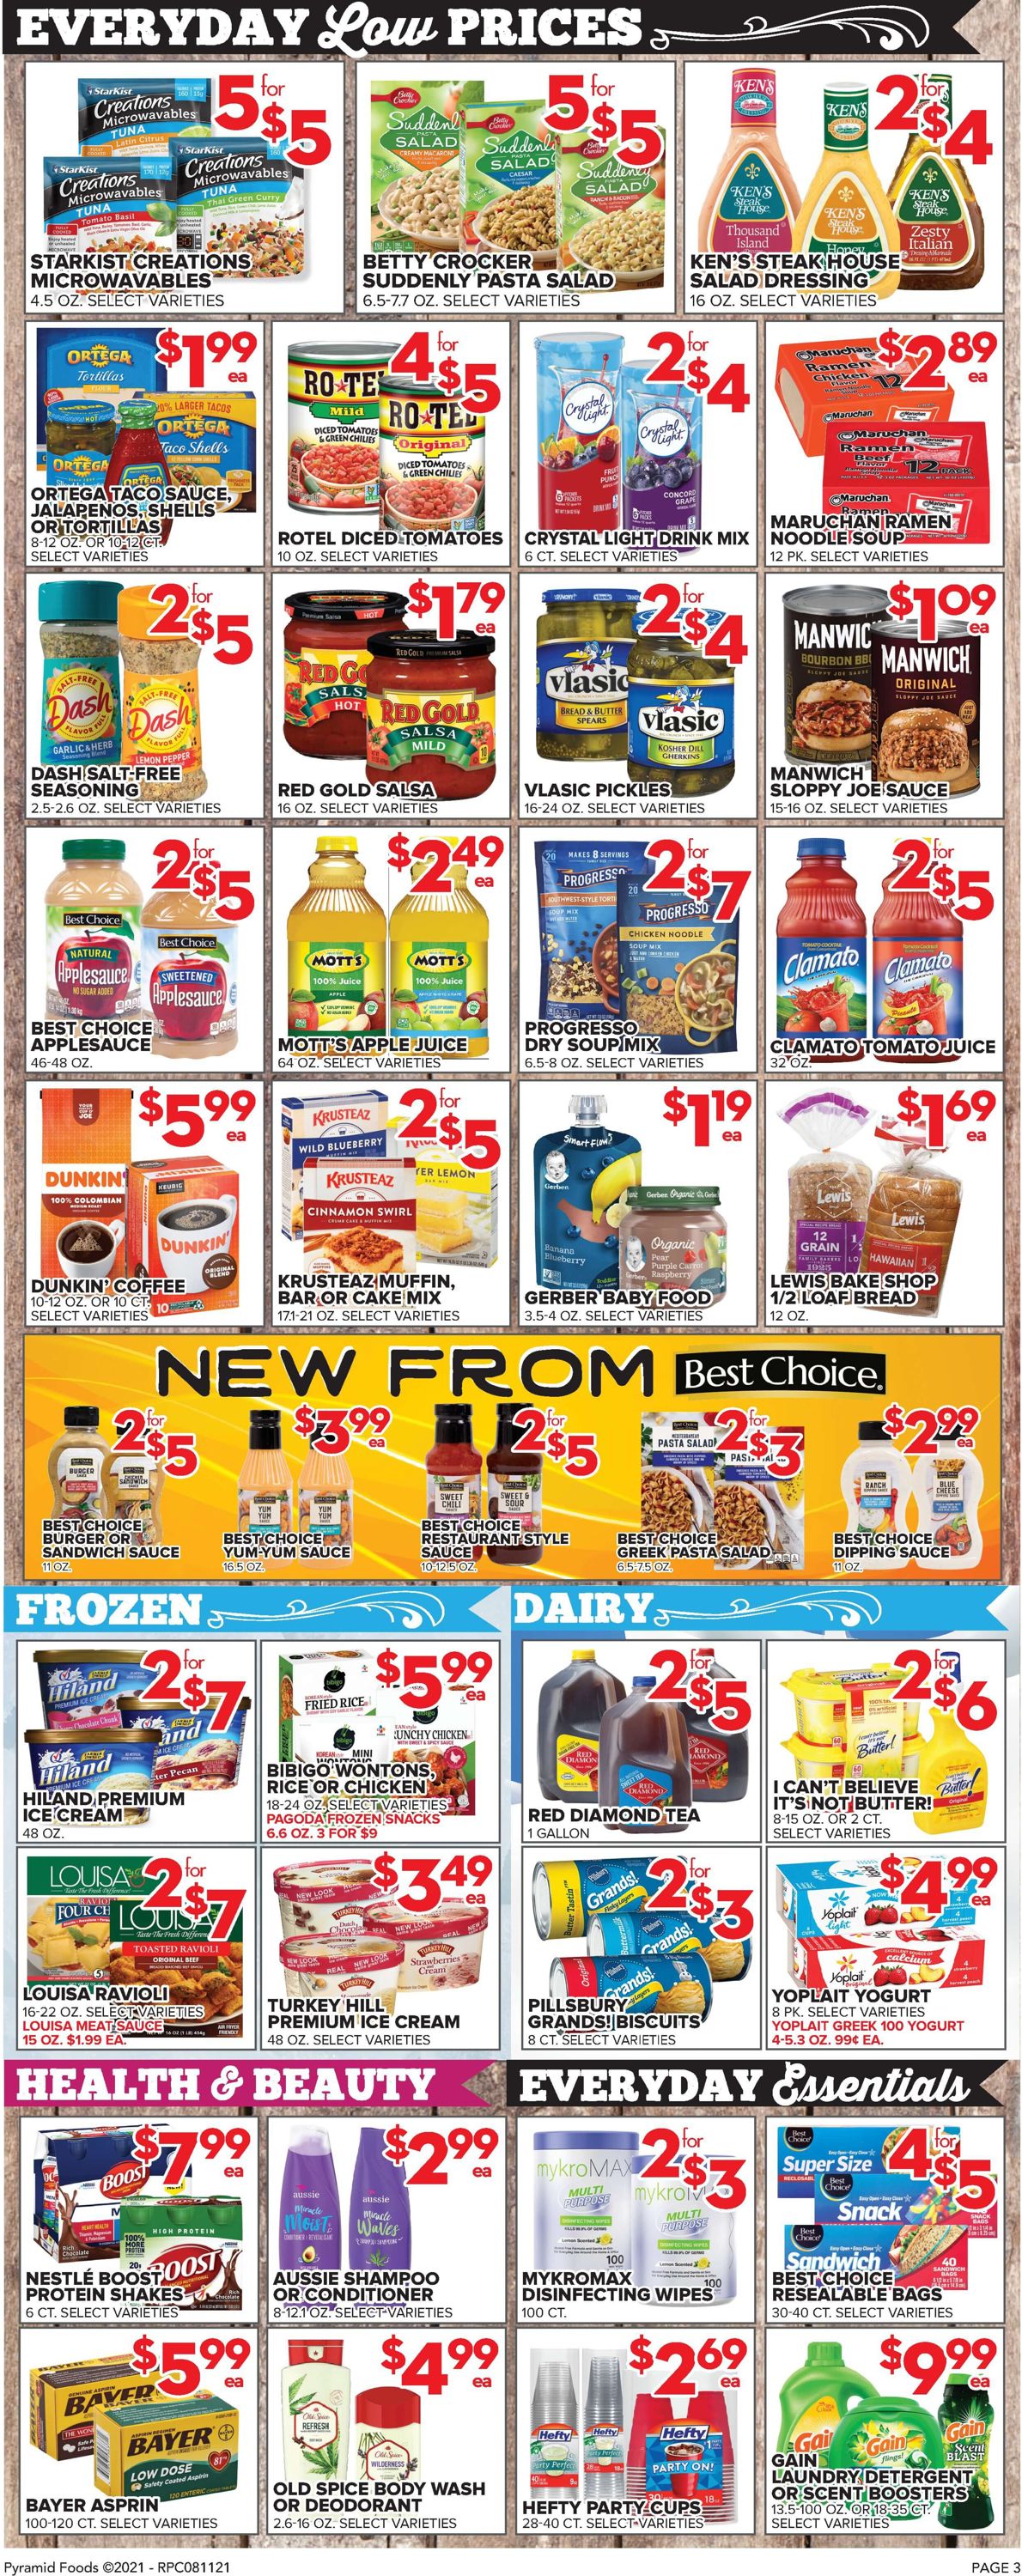 Price Cutter Weekly Ad Circular - valid 08/11-08/17/2021 (Page 3)